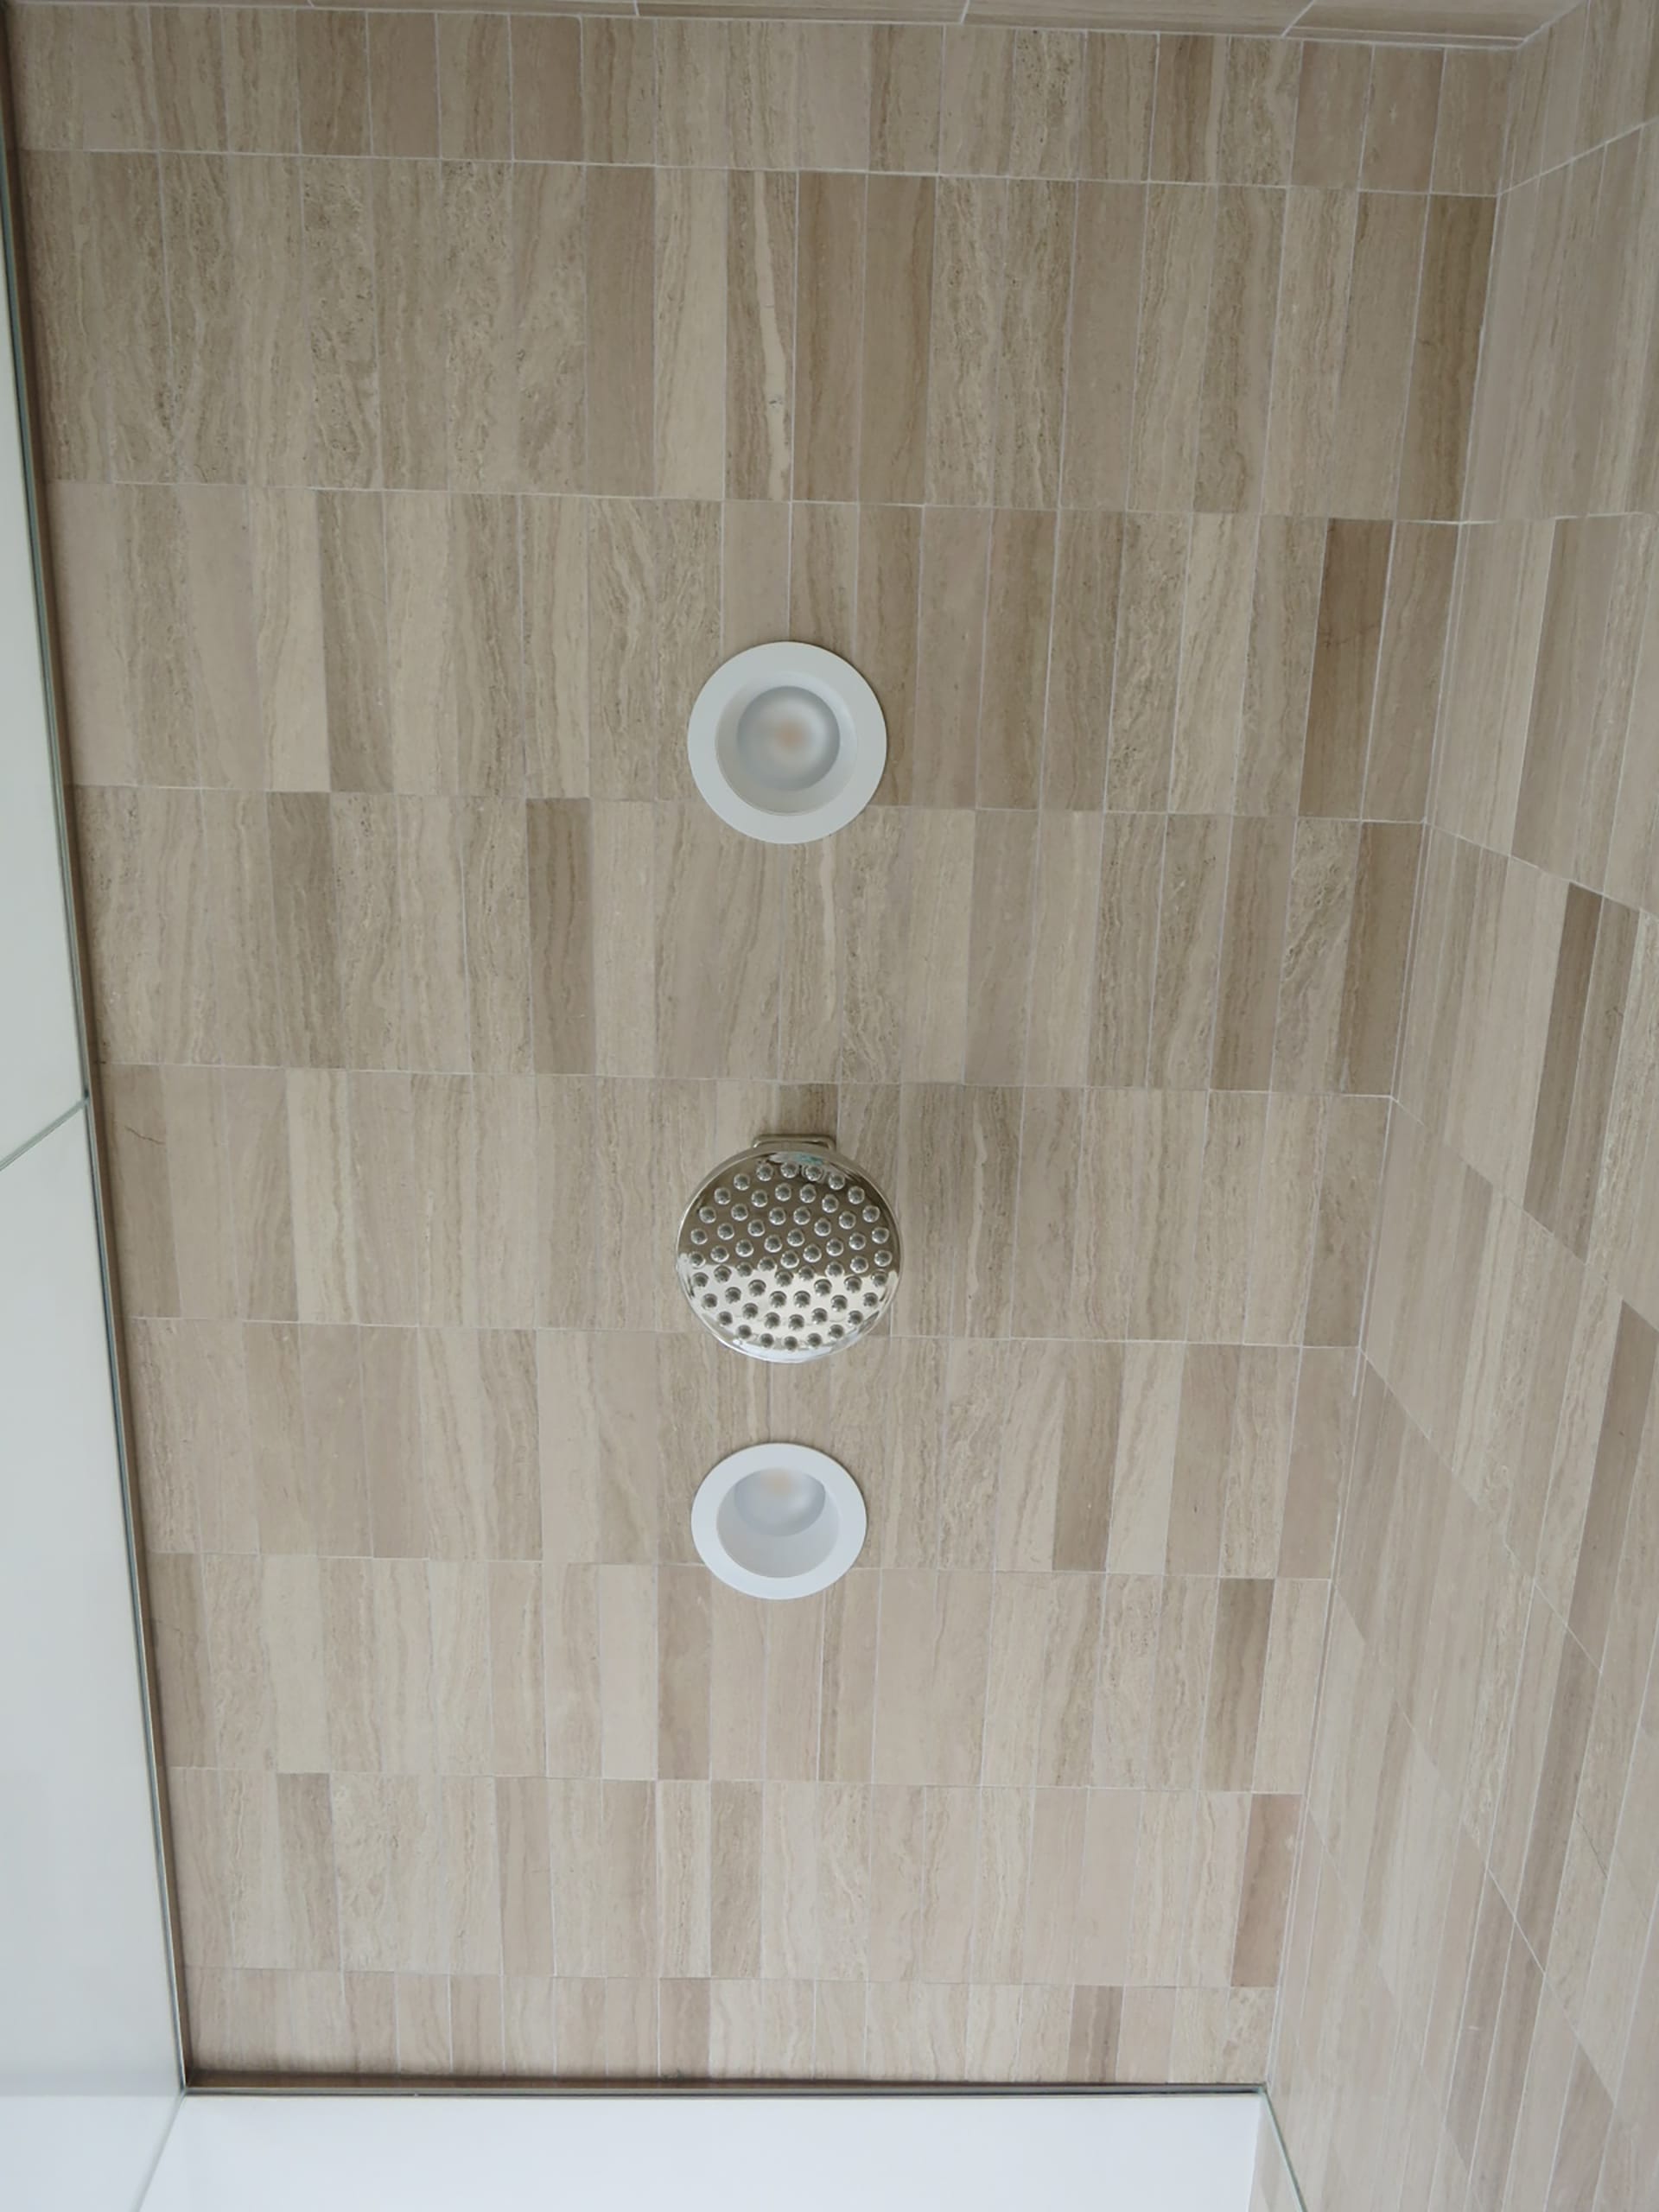 Ceiling of a steam shower with recessed ceiling tiles.